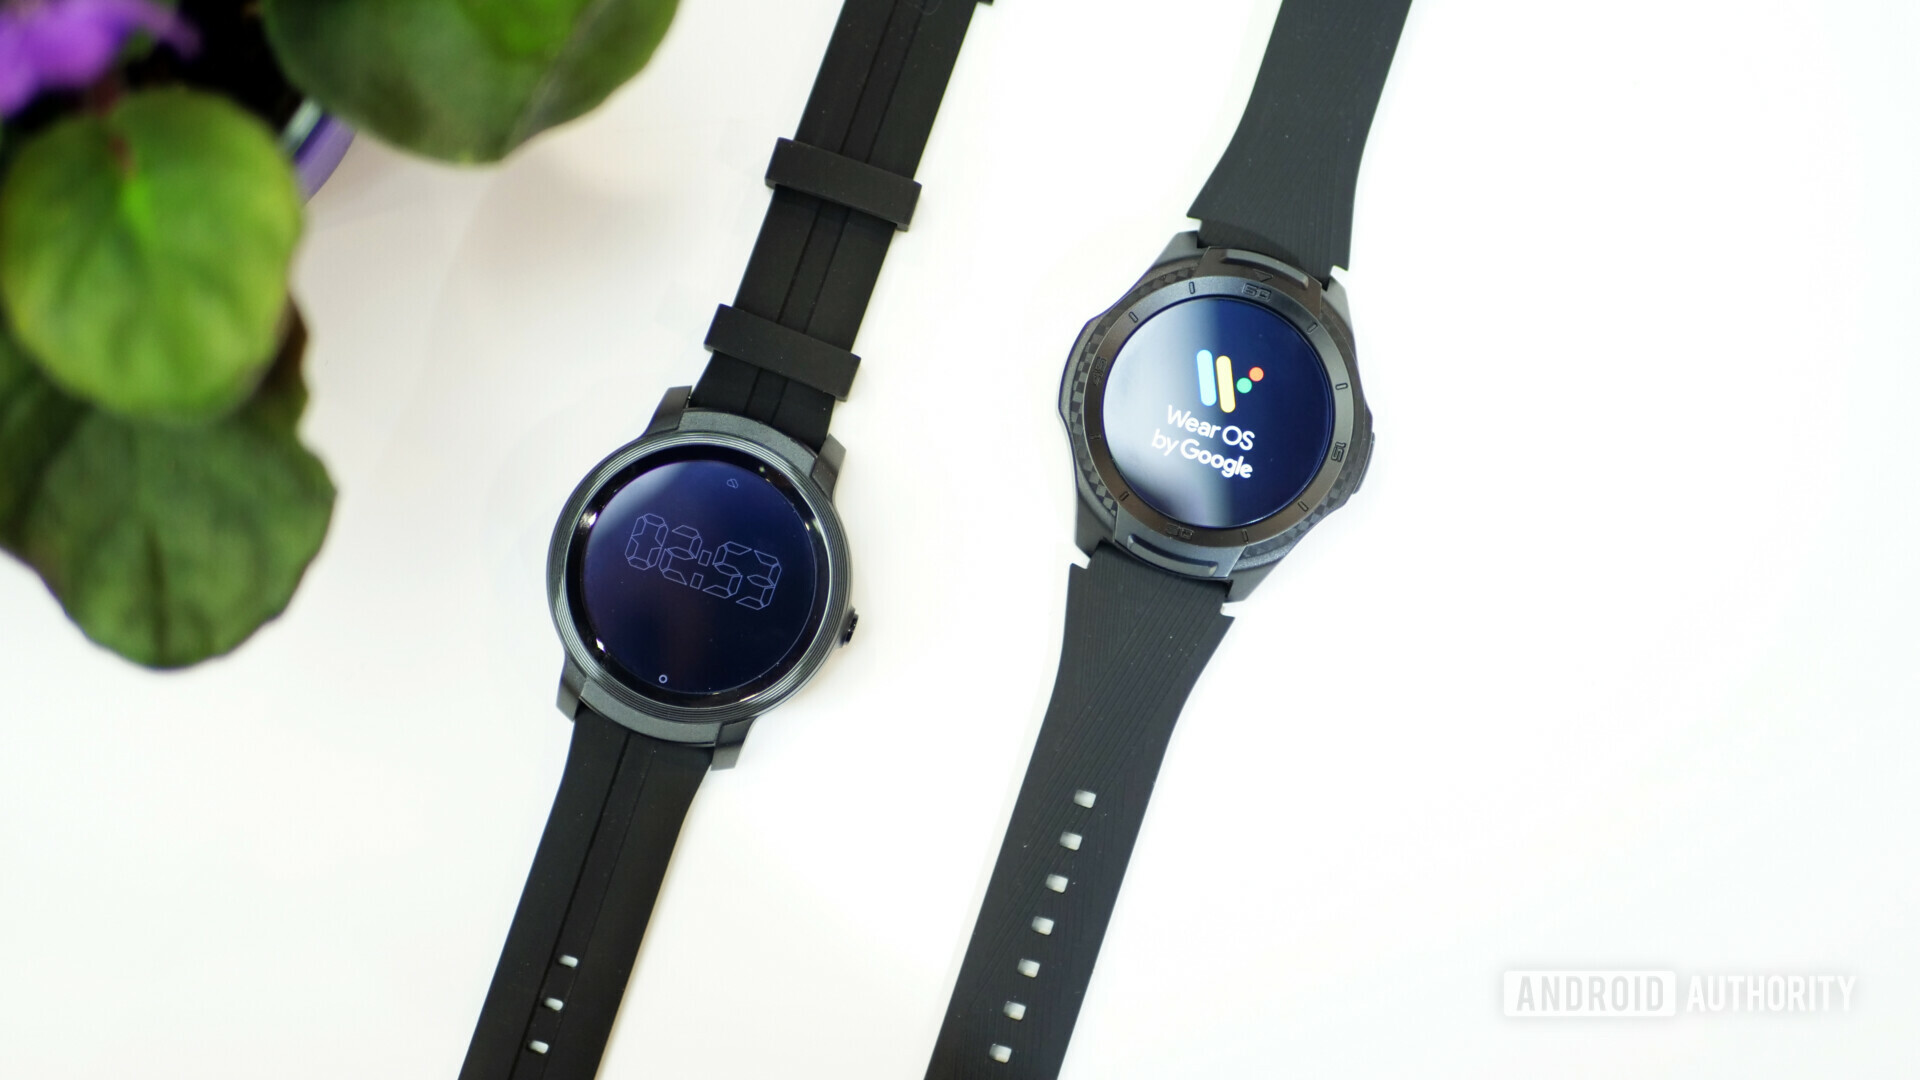 Mobvoi TicWatch E2 and TicWatch S2 at CES 2019